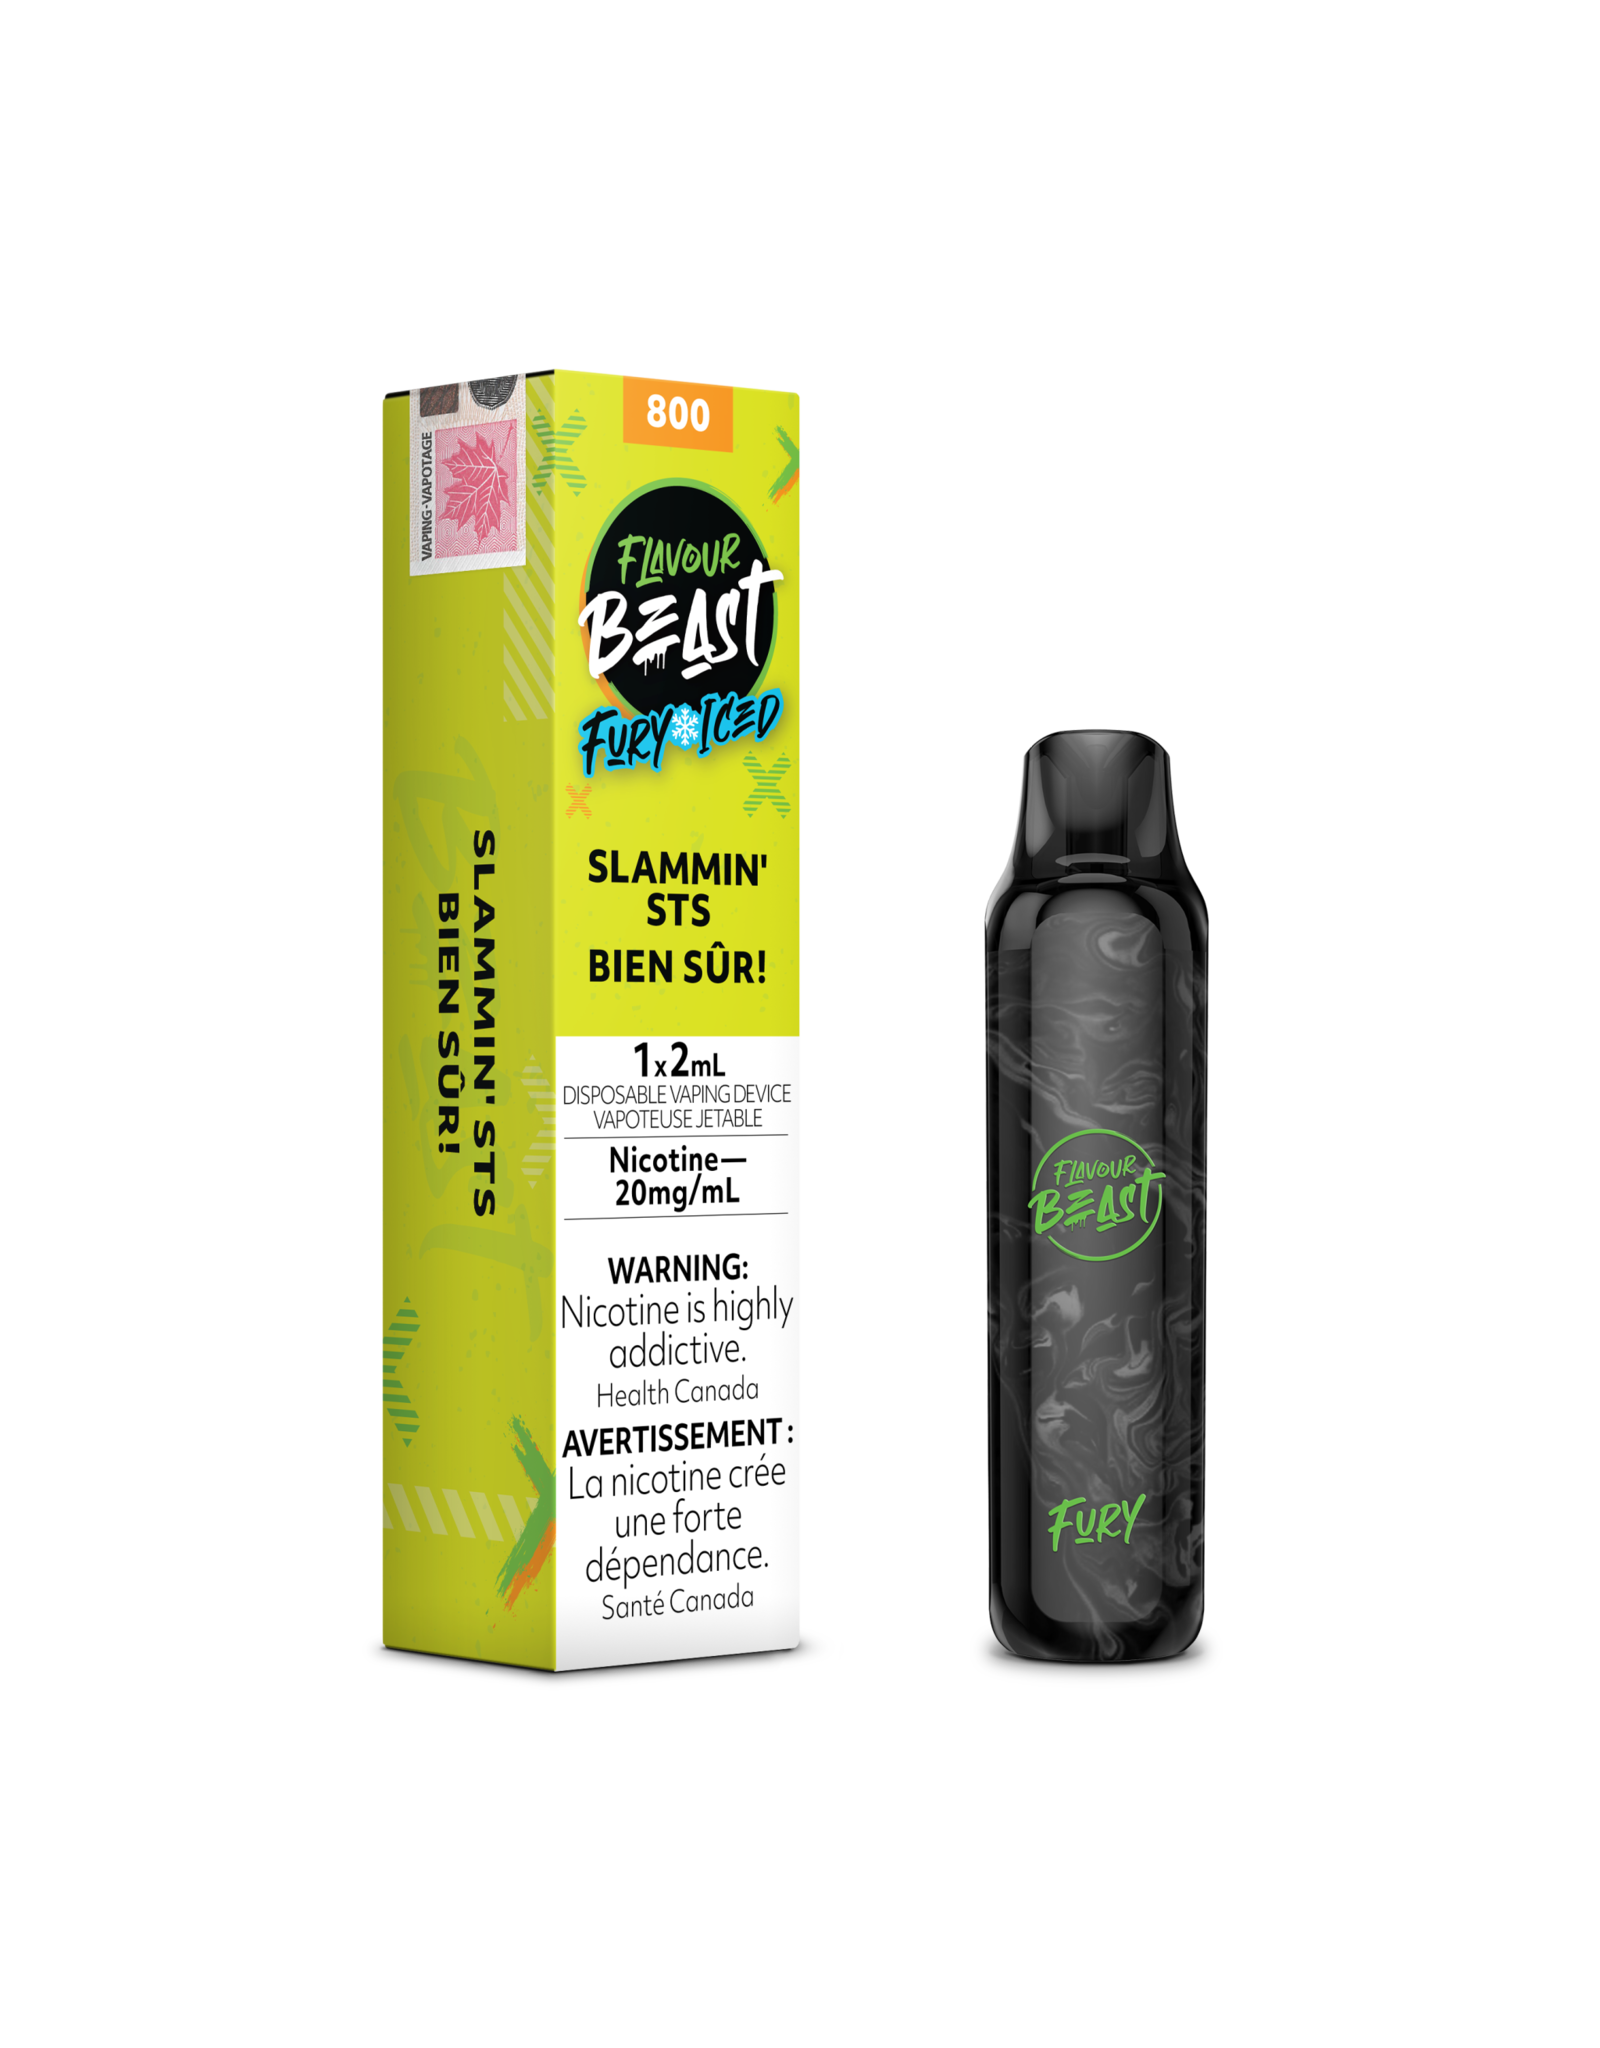 Flavour Beast Flavour Beast Fury DISPOSABLE 2ml